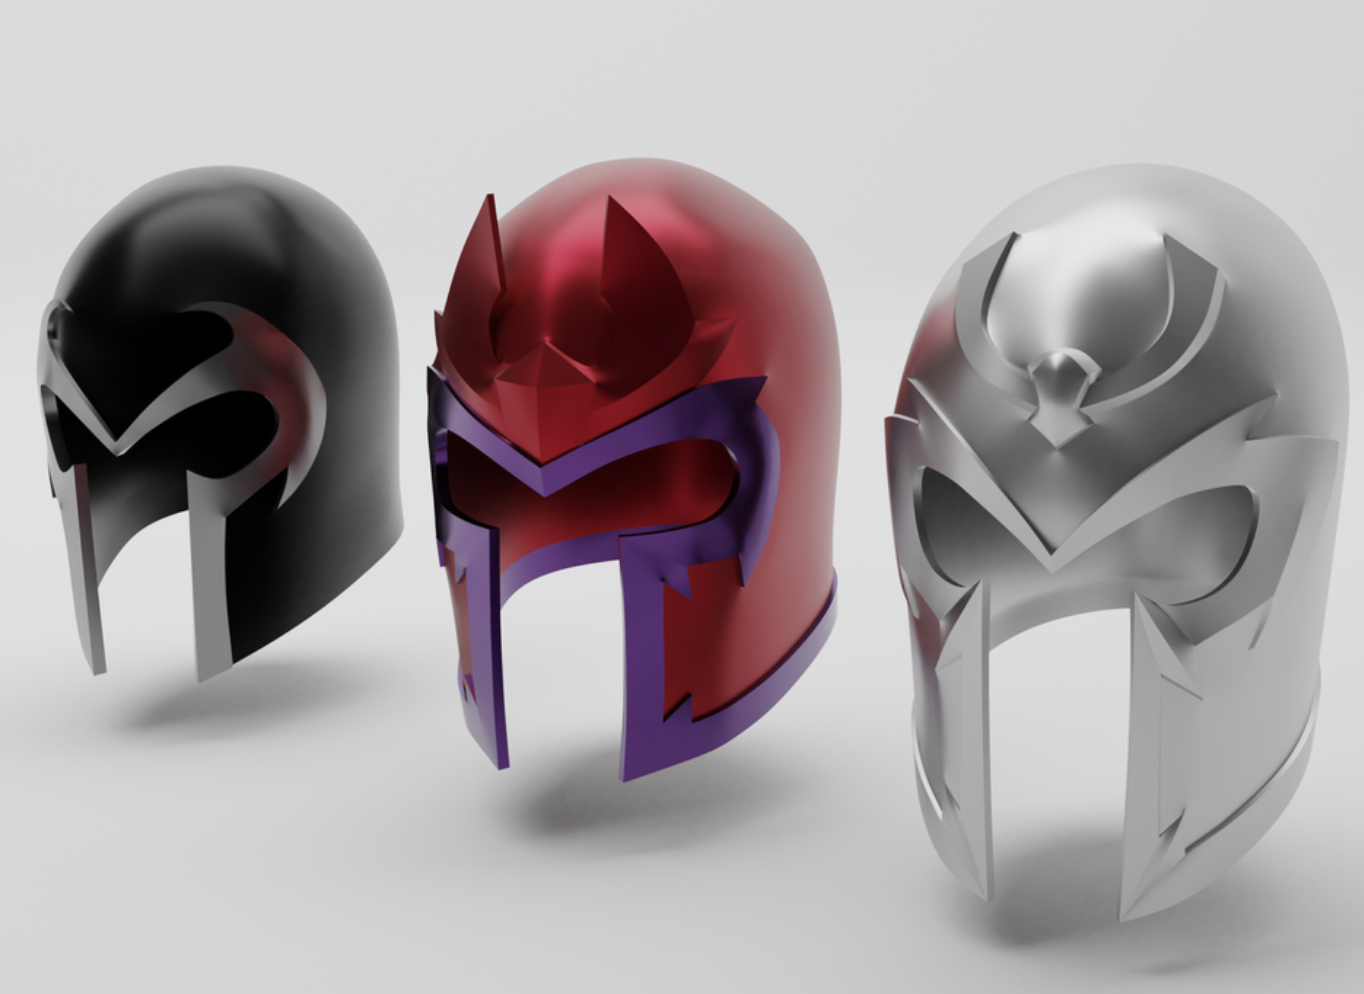 3 magneto helmets created with 3D printer.